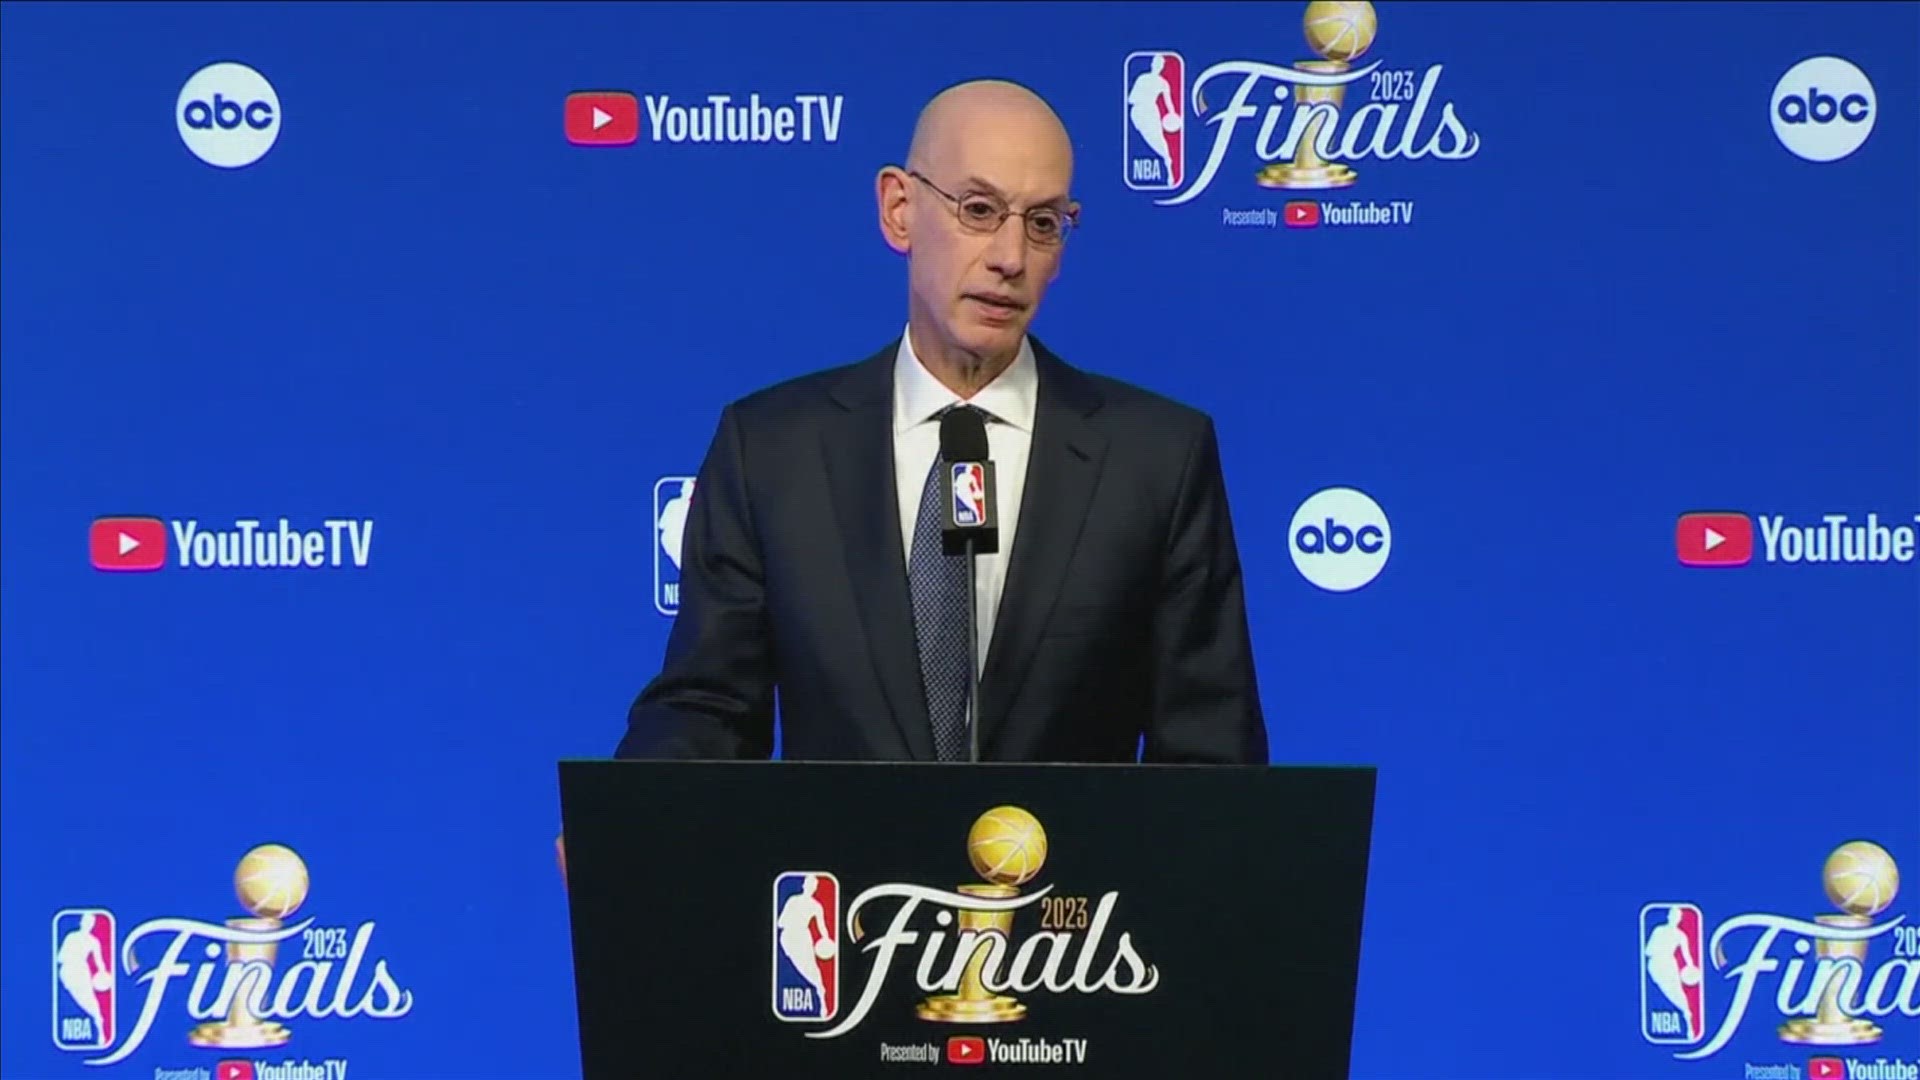 The NBA commissioner said the league chose to wait to publicly announce its findings so as not to distract from the Finals